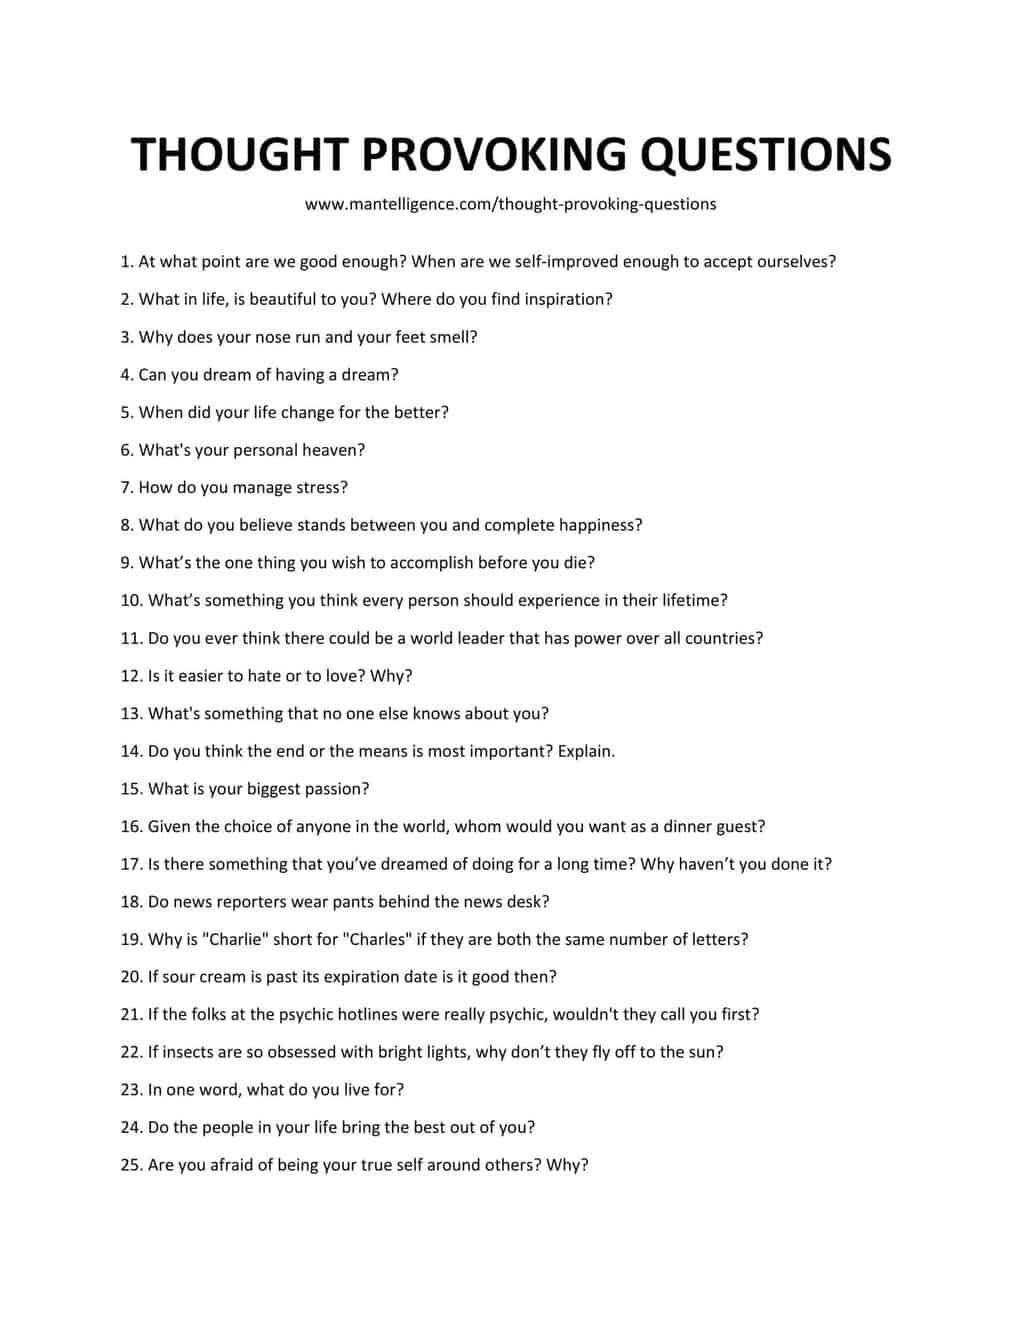 List of Thought Provoking Questions